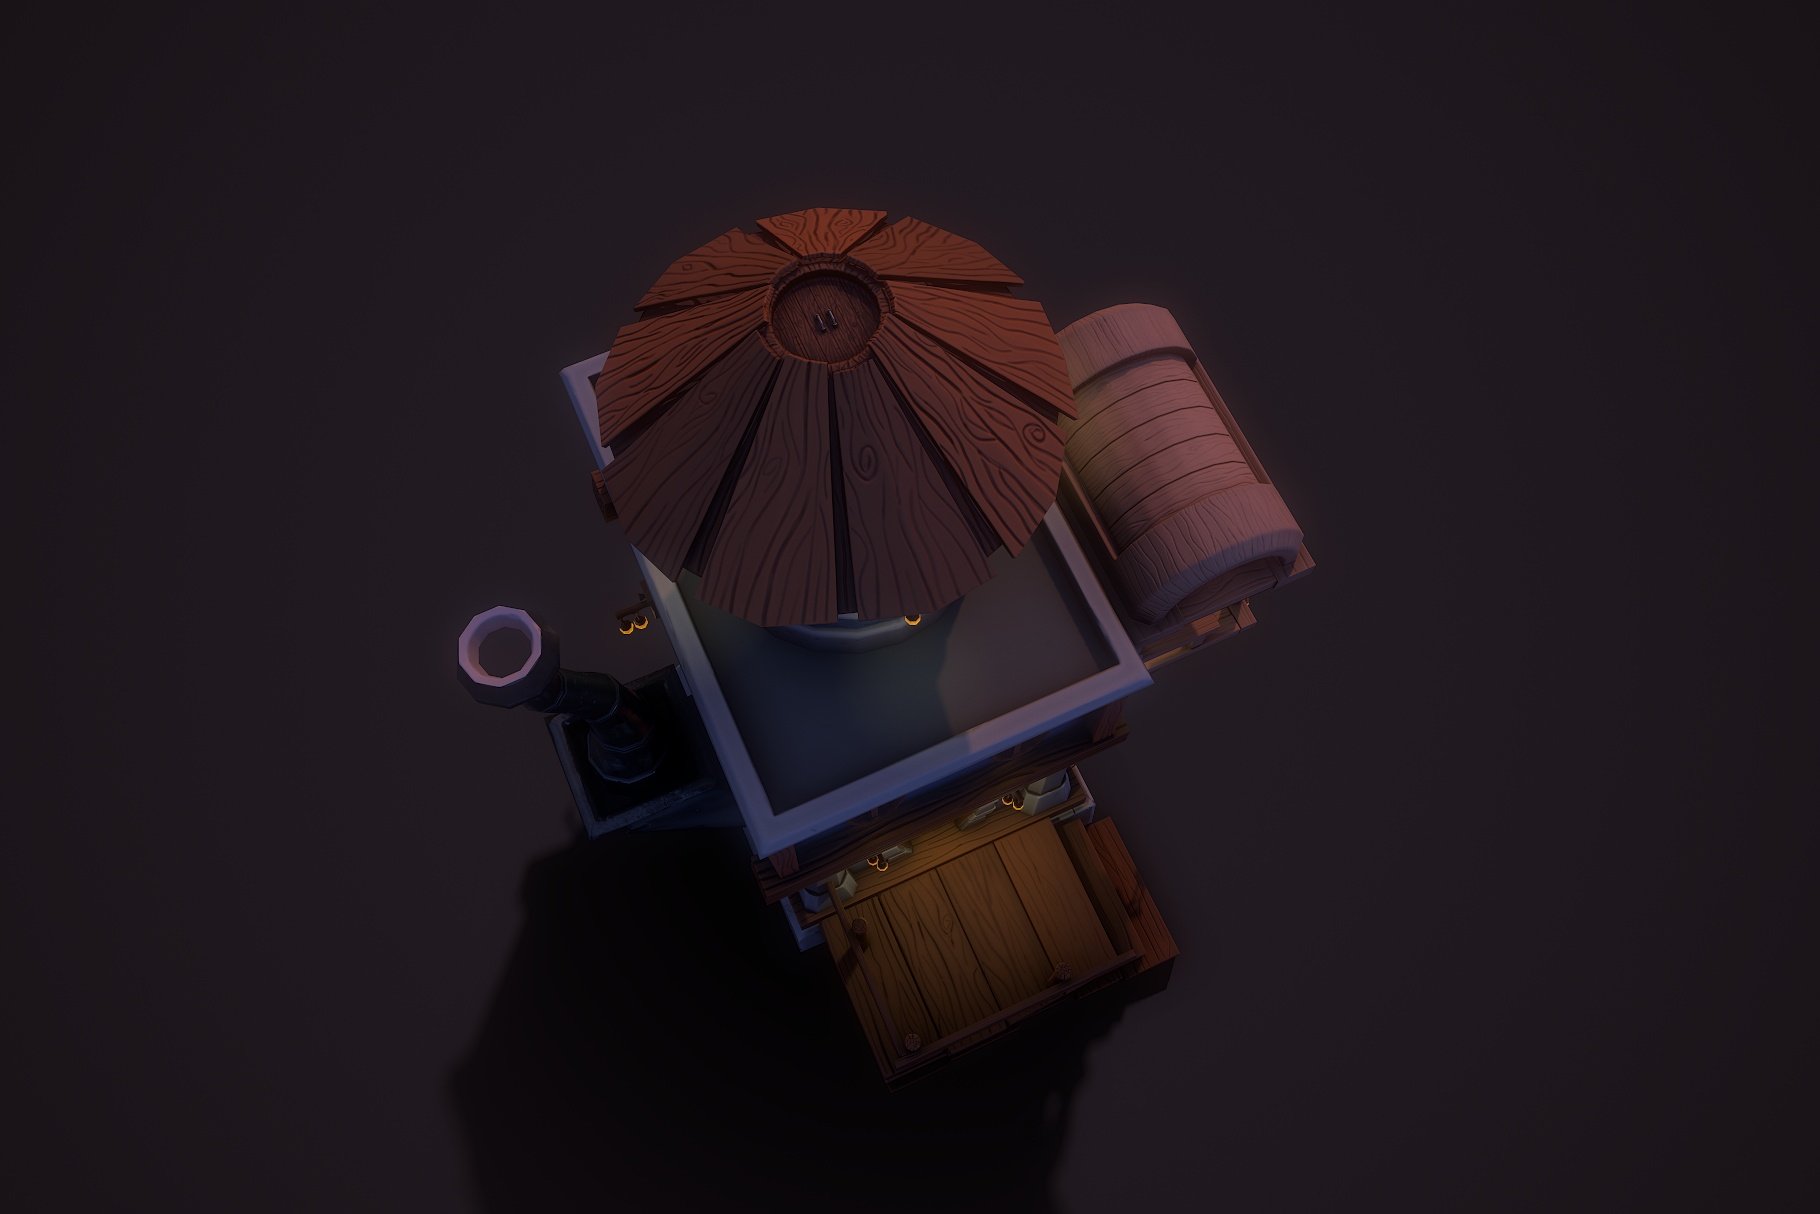 Mockup of fantasy teapot house from above.